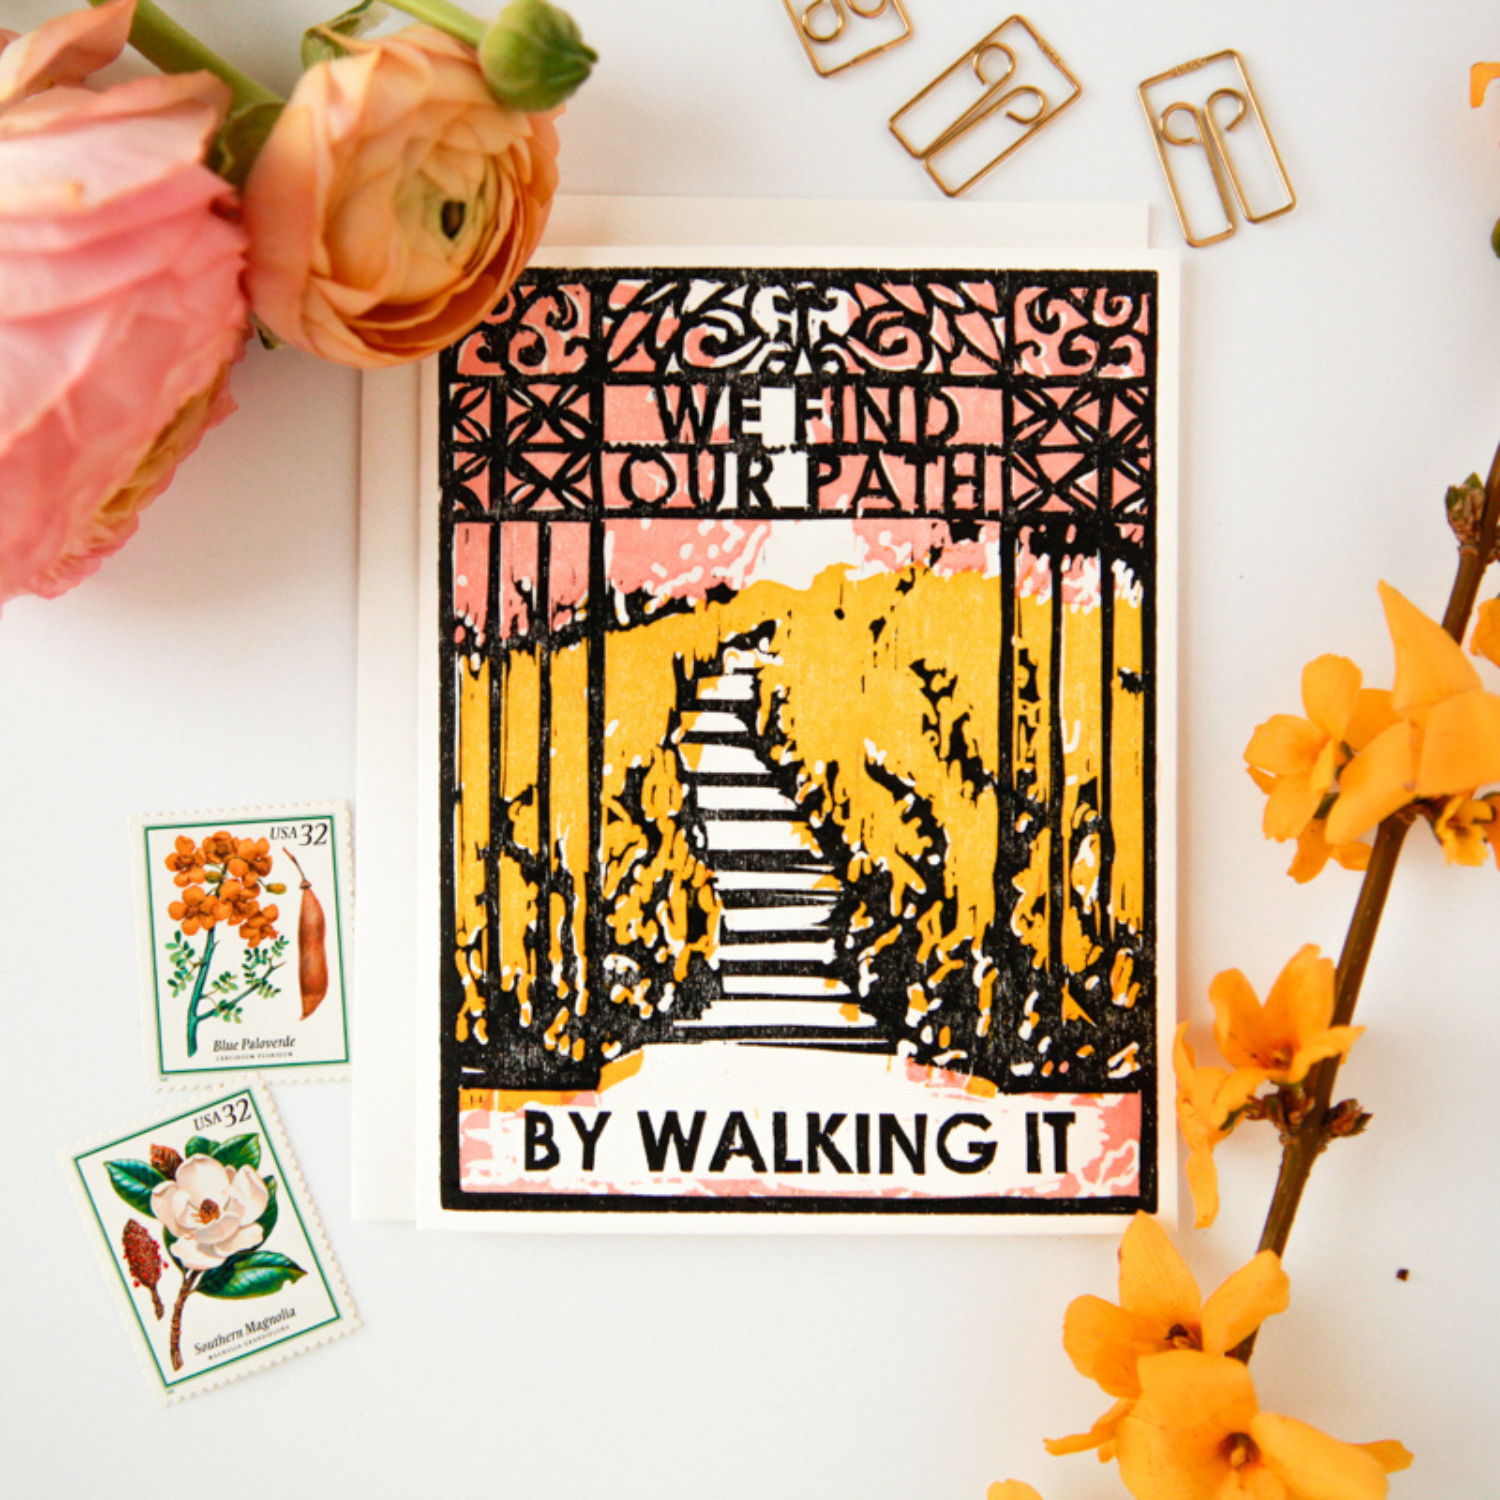 We find our path by walking it letterpress card